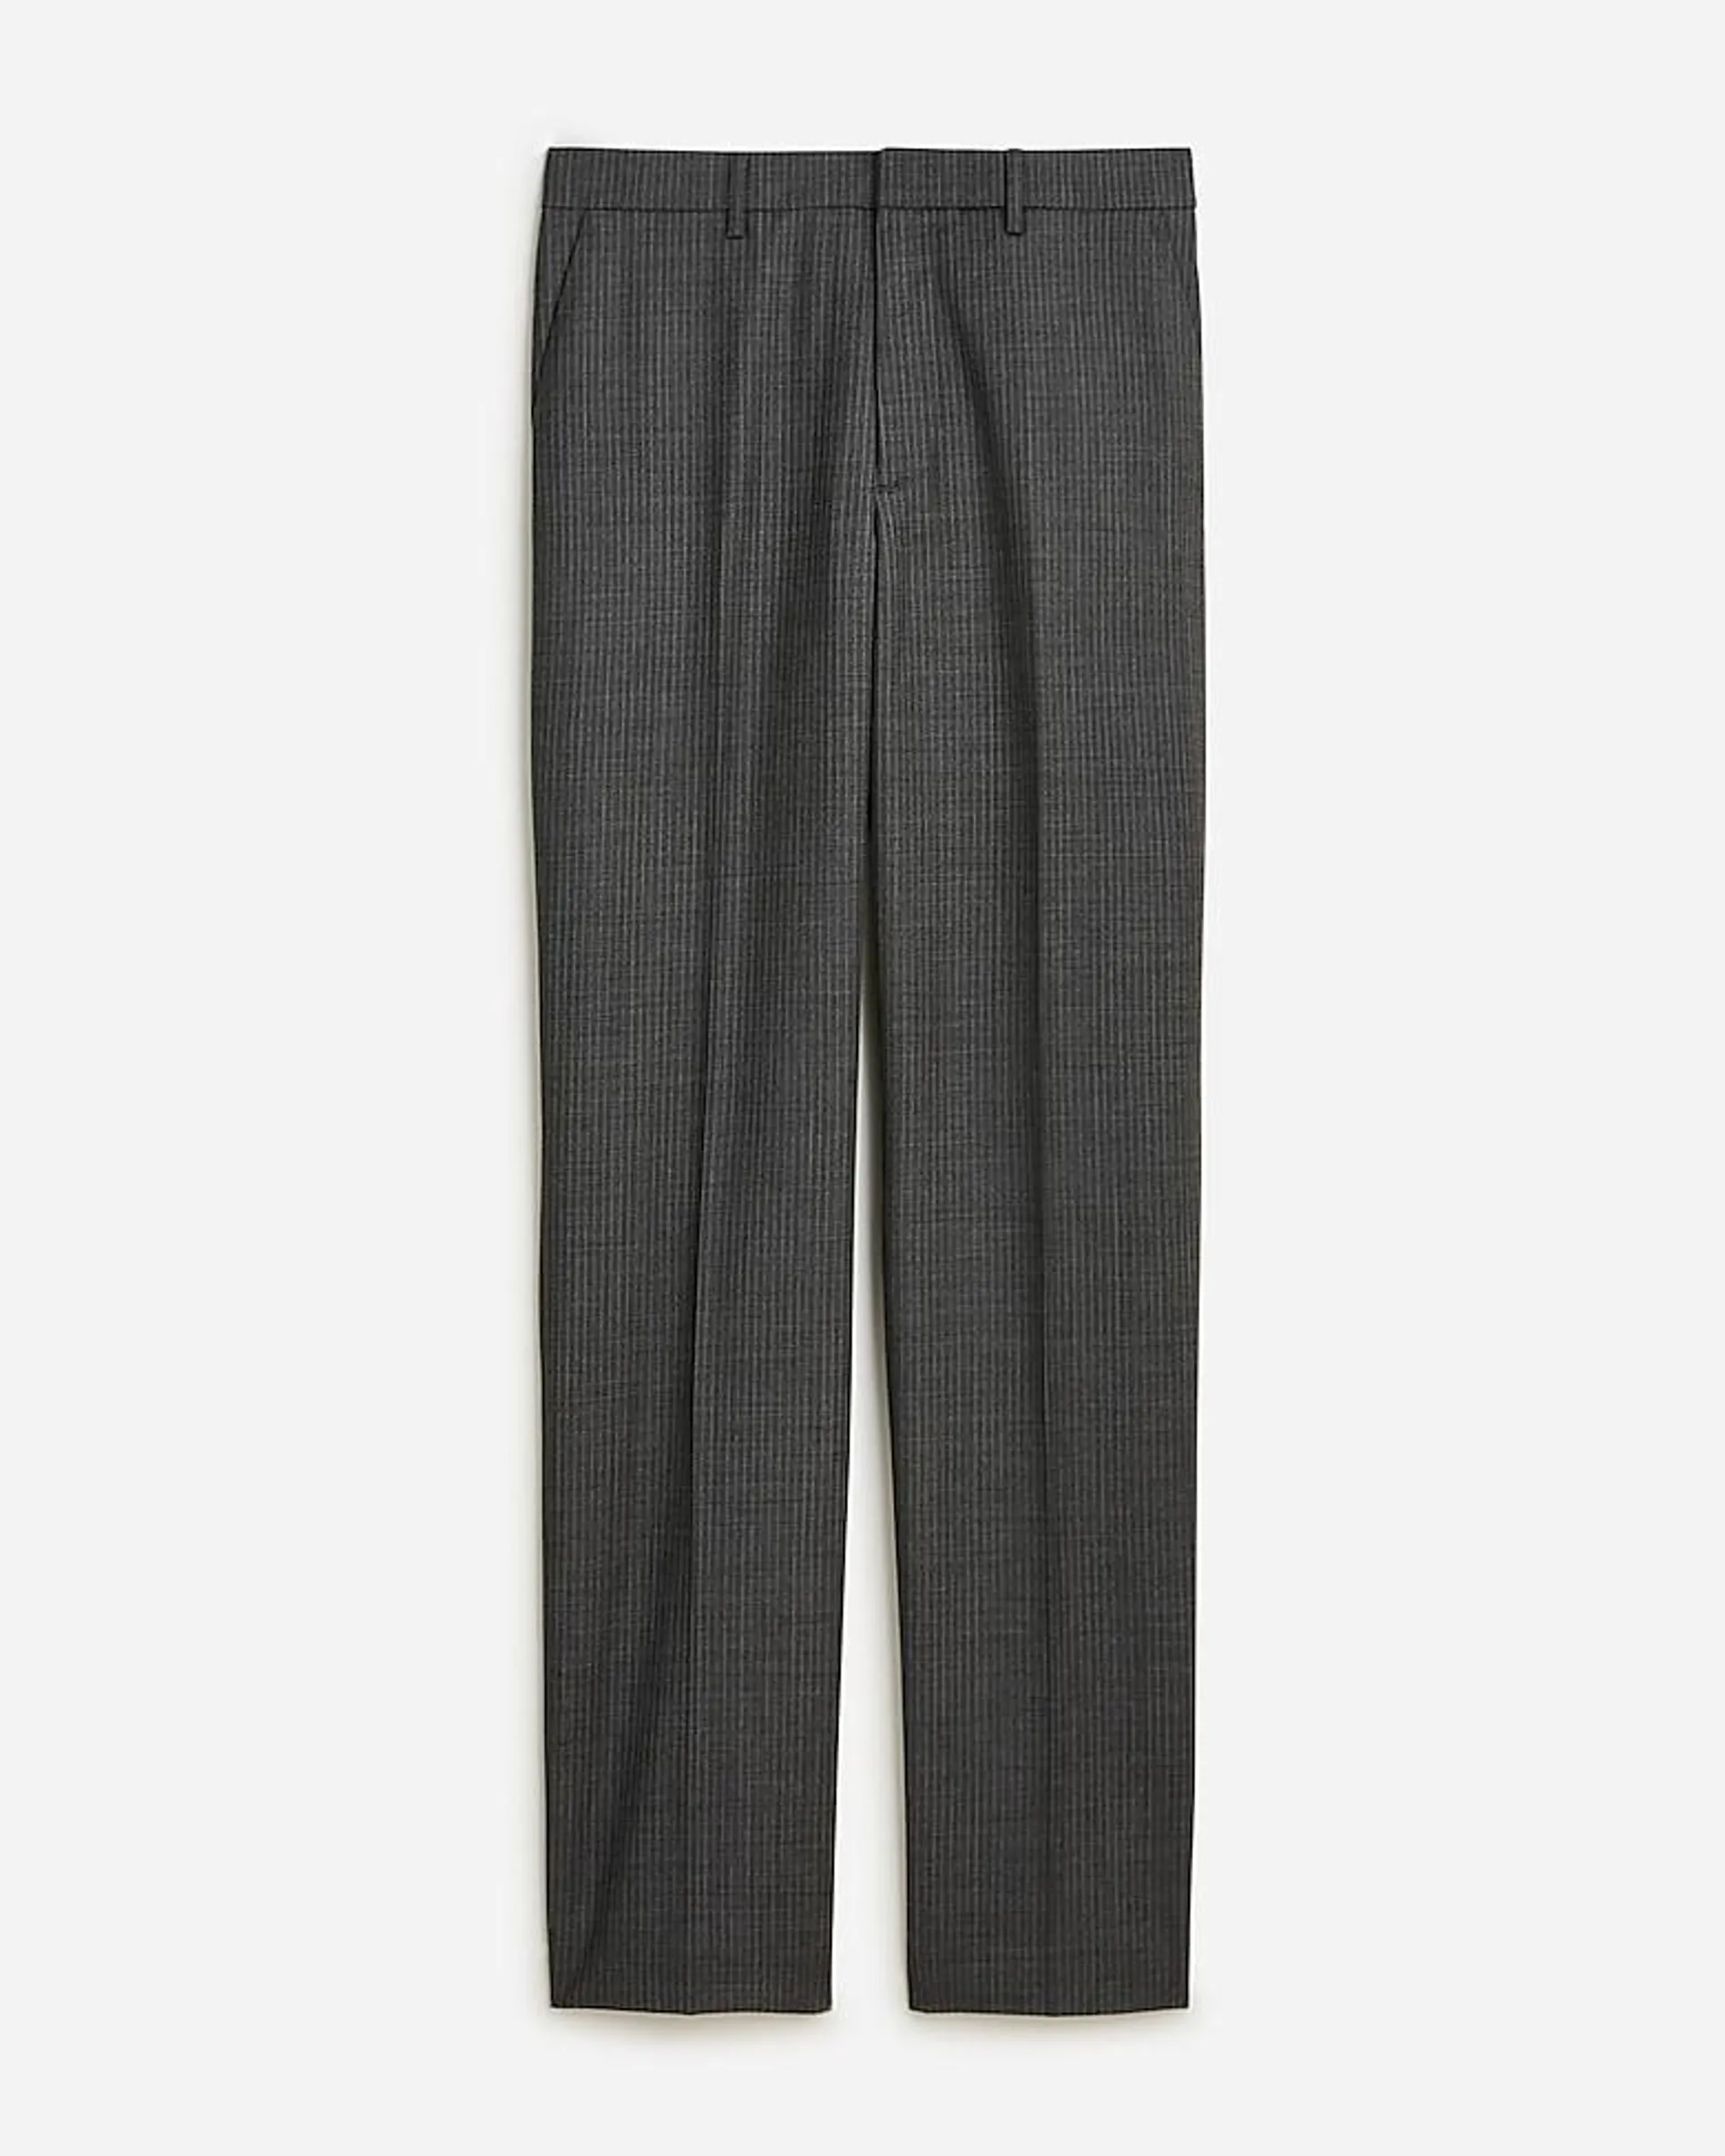 Bowery dress pant in stretch wool blend